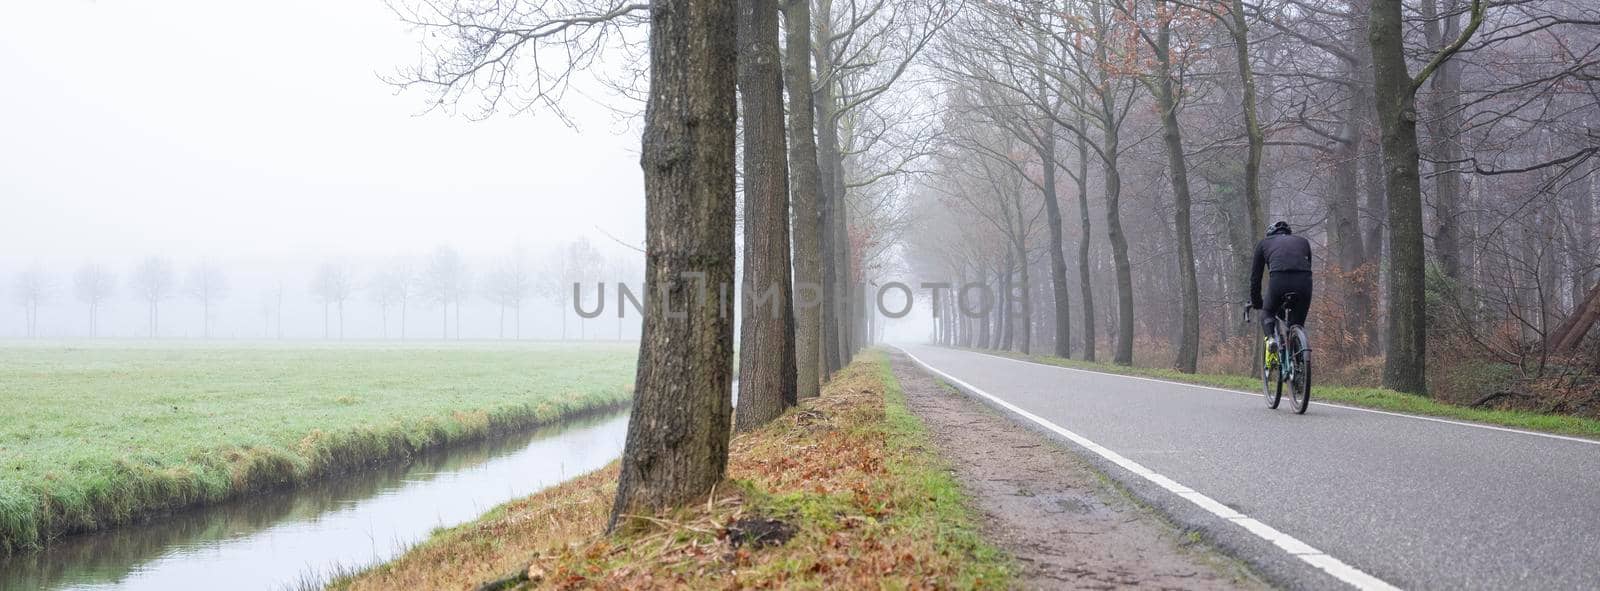 man rides bike on country road on misty winter morning in the netherlands near utrecht by ahavelaar